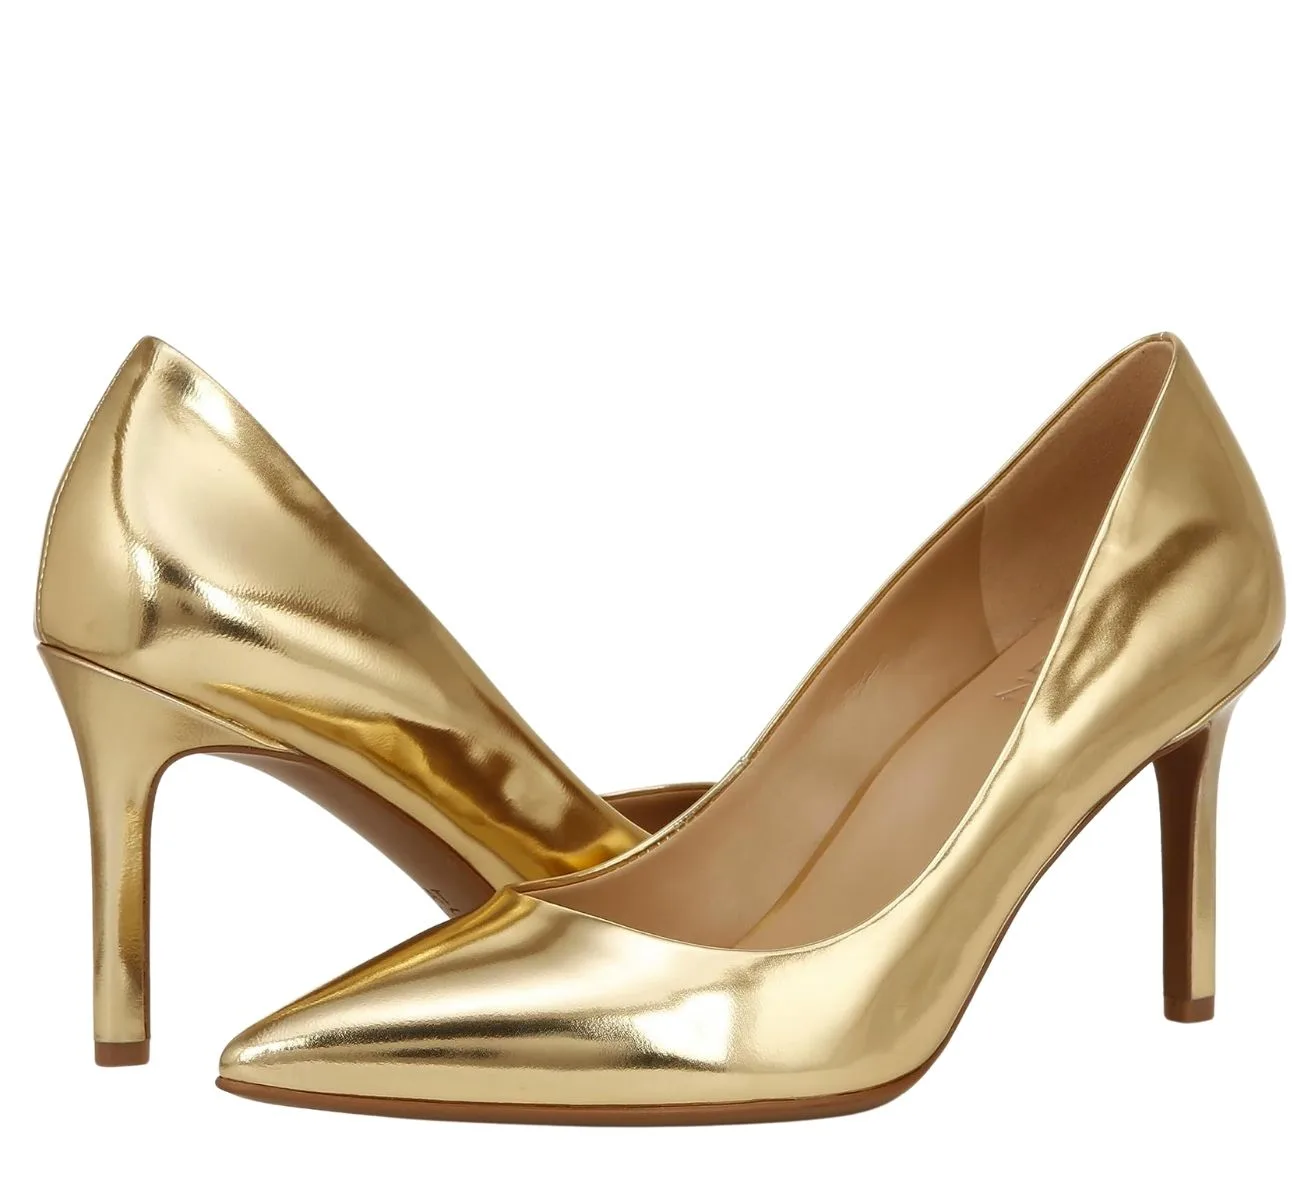 All the Best Color Shoes to Wear with a Gold Dress | ShoeTease